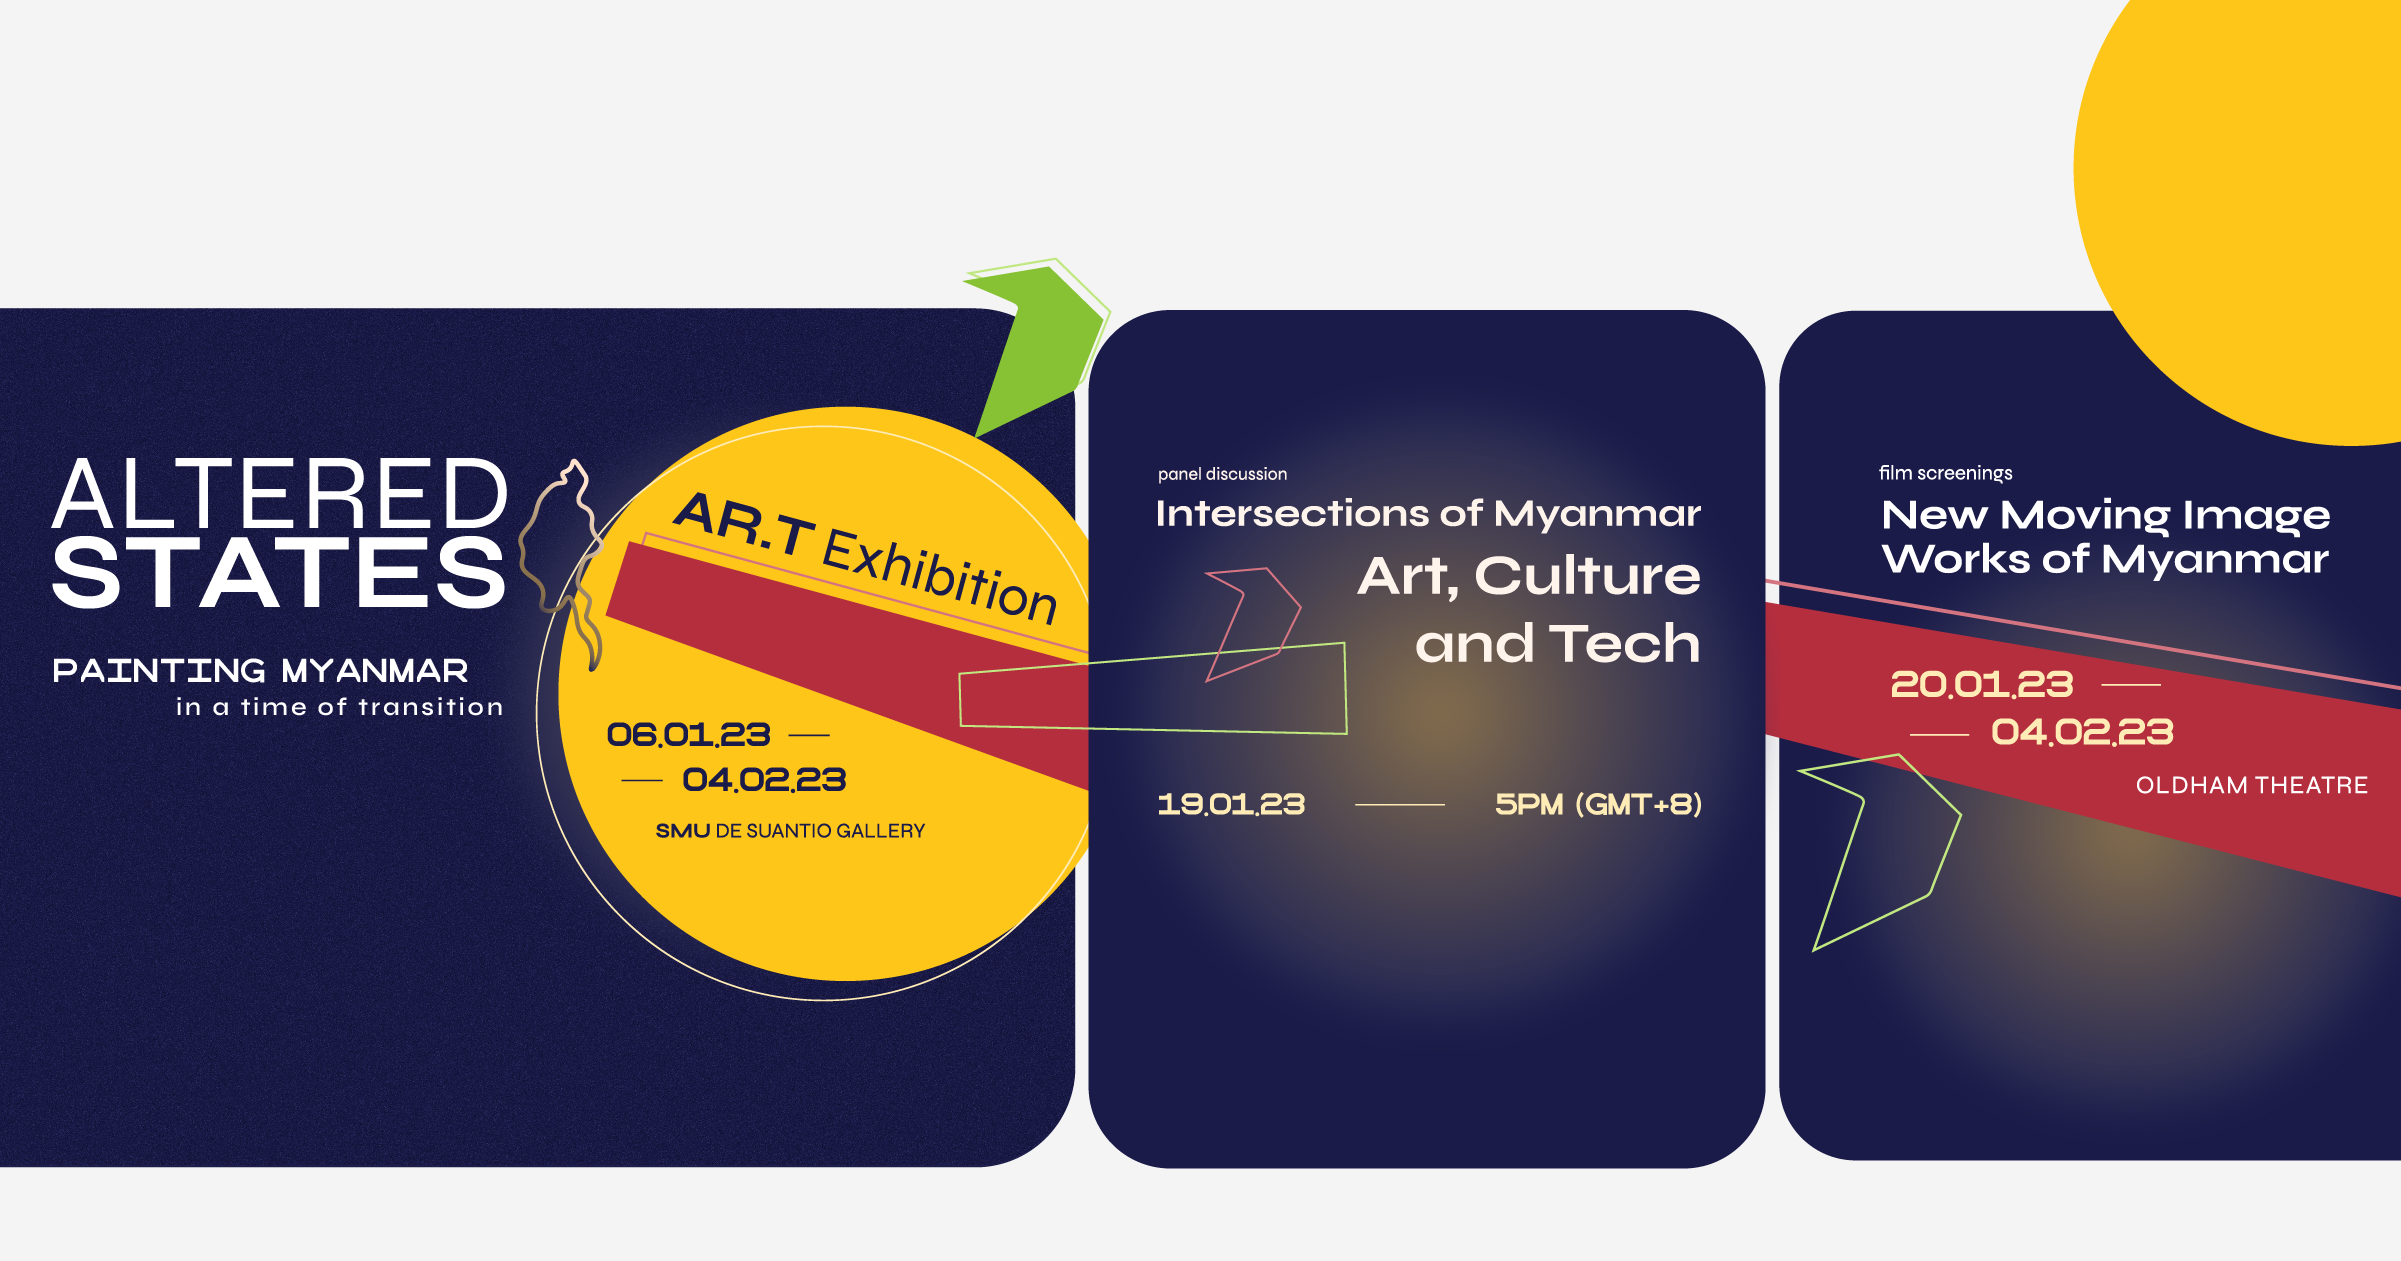 Kick-start 2023 with an AR.T exhibition, a panel discussion and three film screenings.